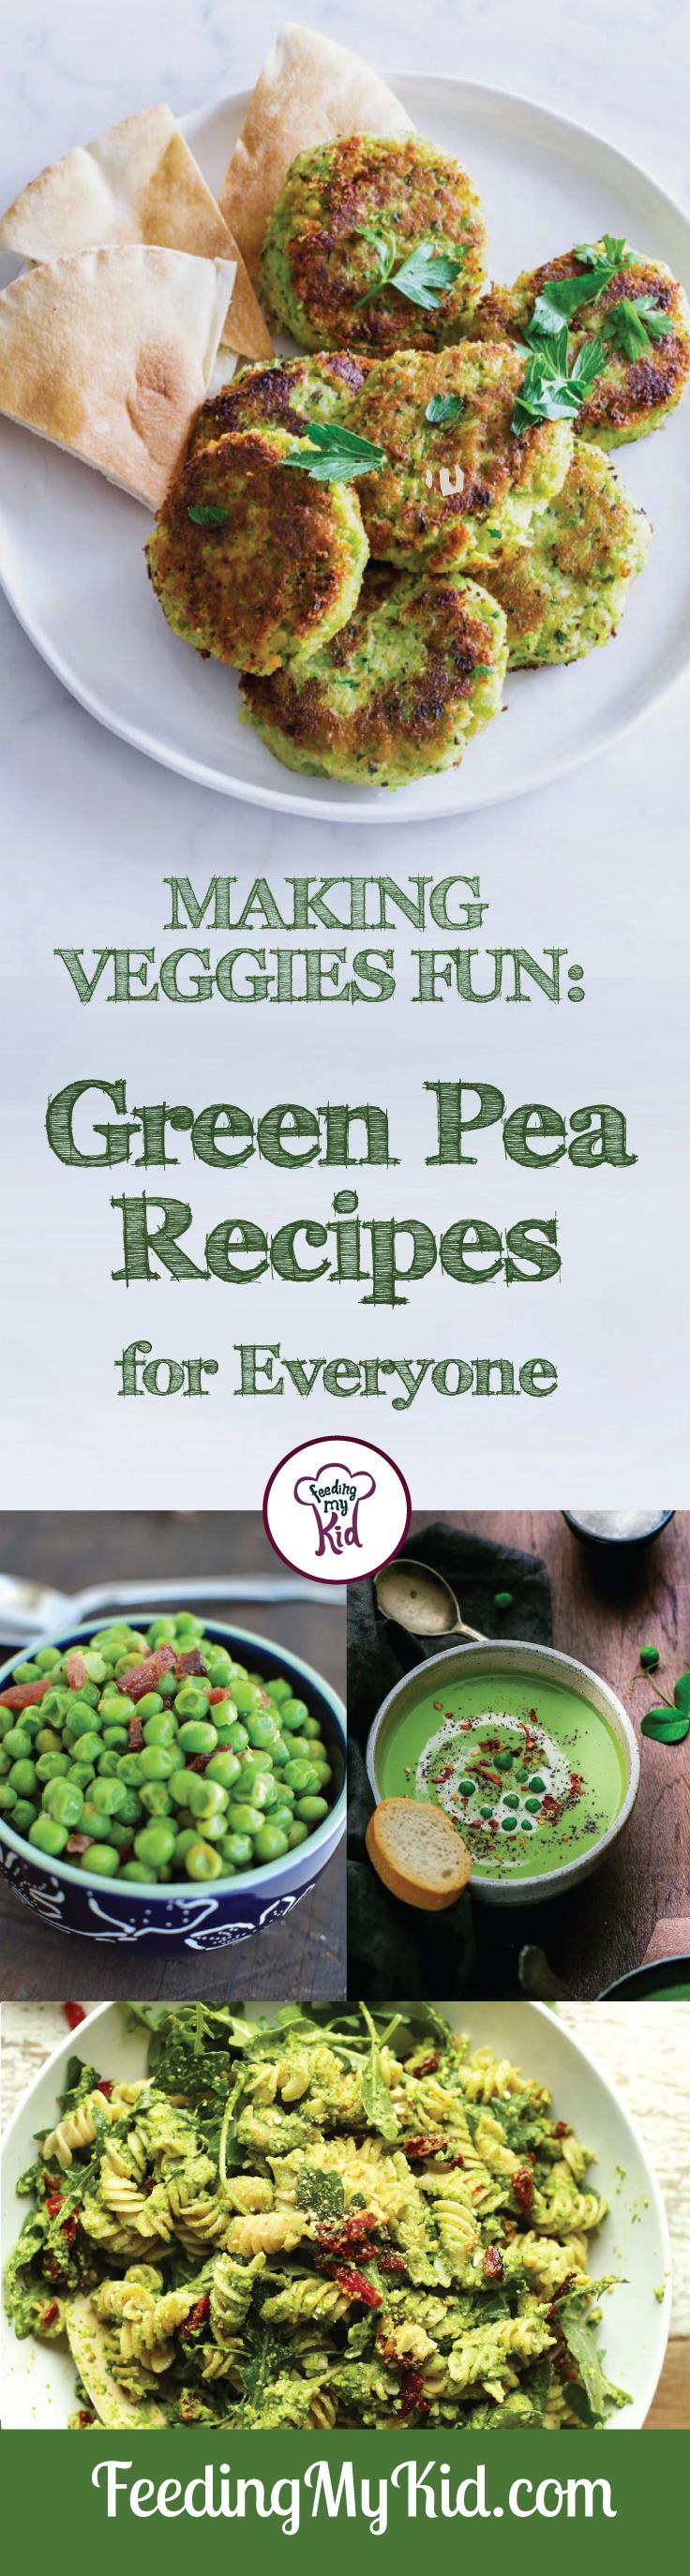 Green peas can seem boring. With our ultimate list of green peas recipes, your picky eater will be eating peas in no time. Get inspired with these ideas!